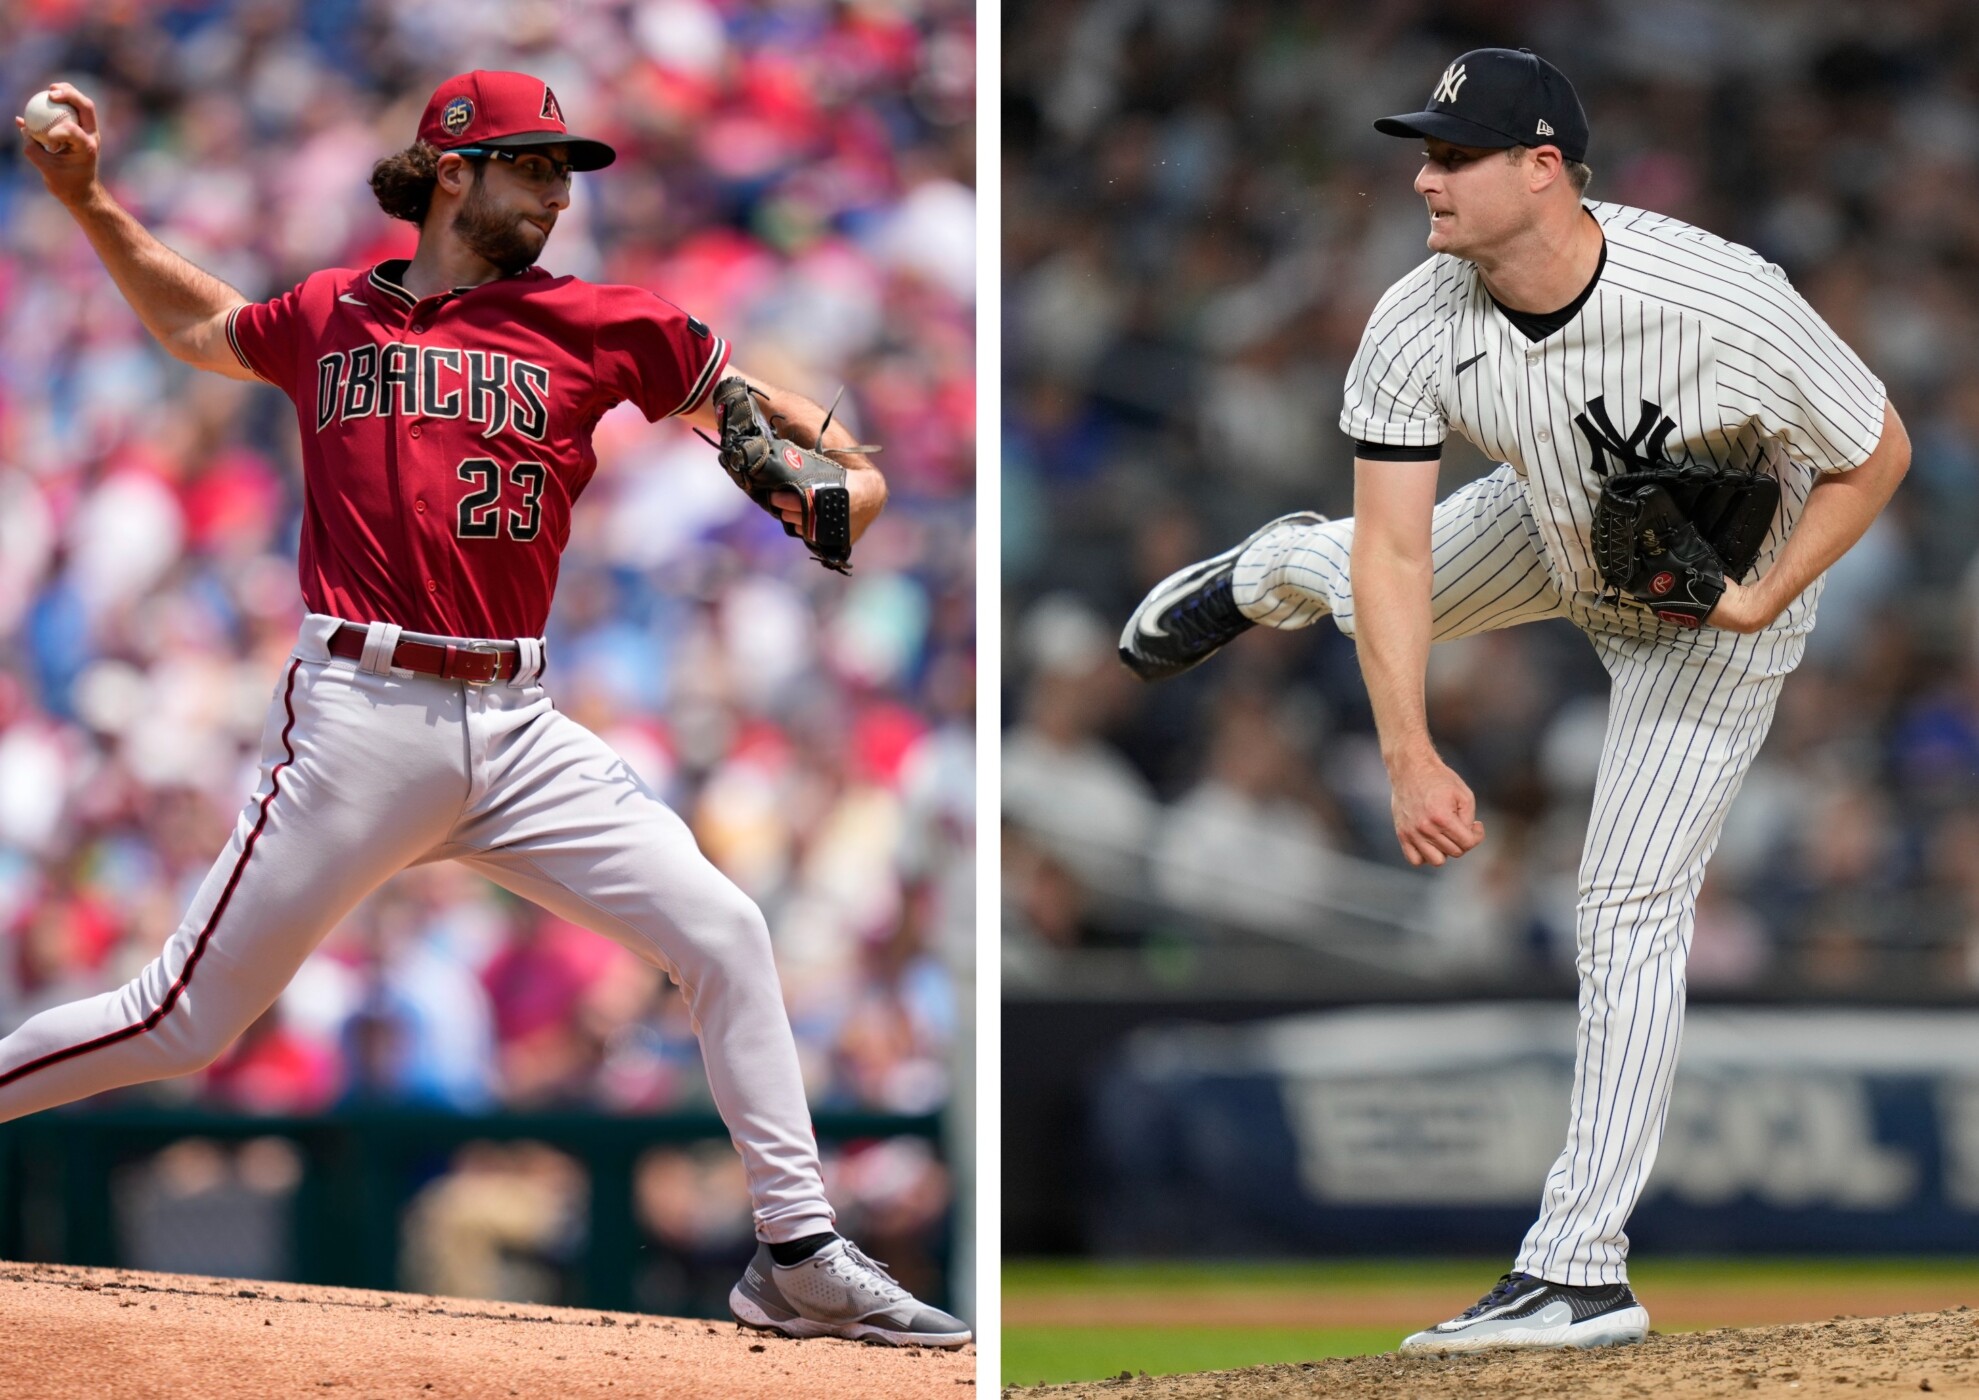 What starting pitchers should get nod in 2023 MLB All-Star Game